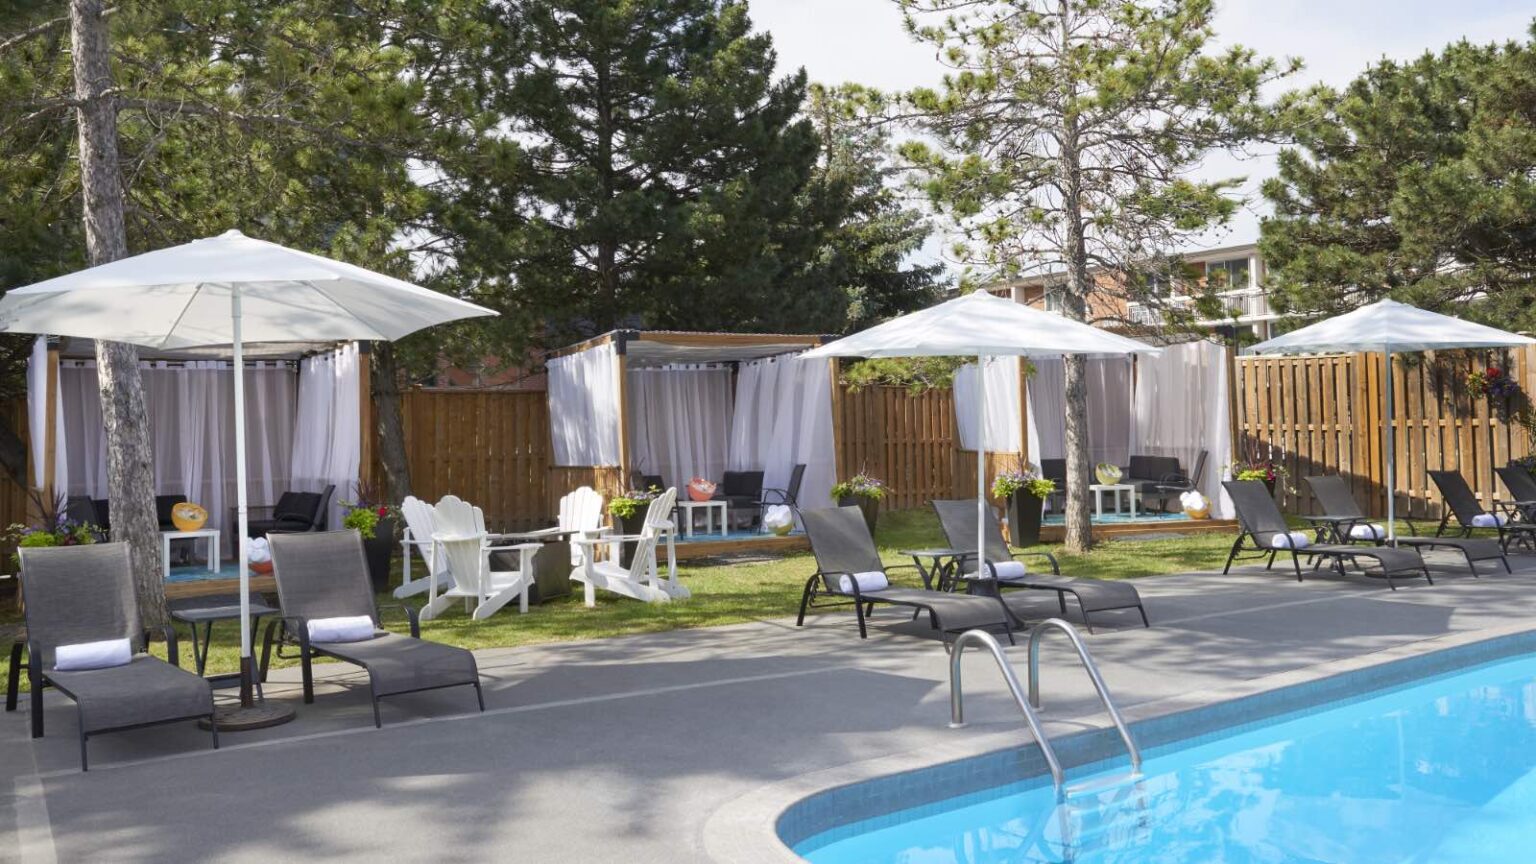 Best Western Parkway outdoor pool and cabanas